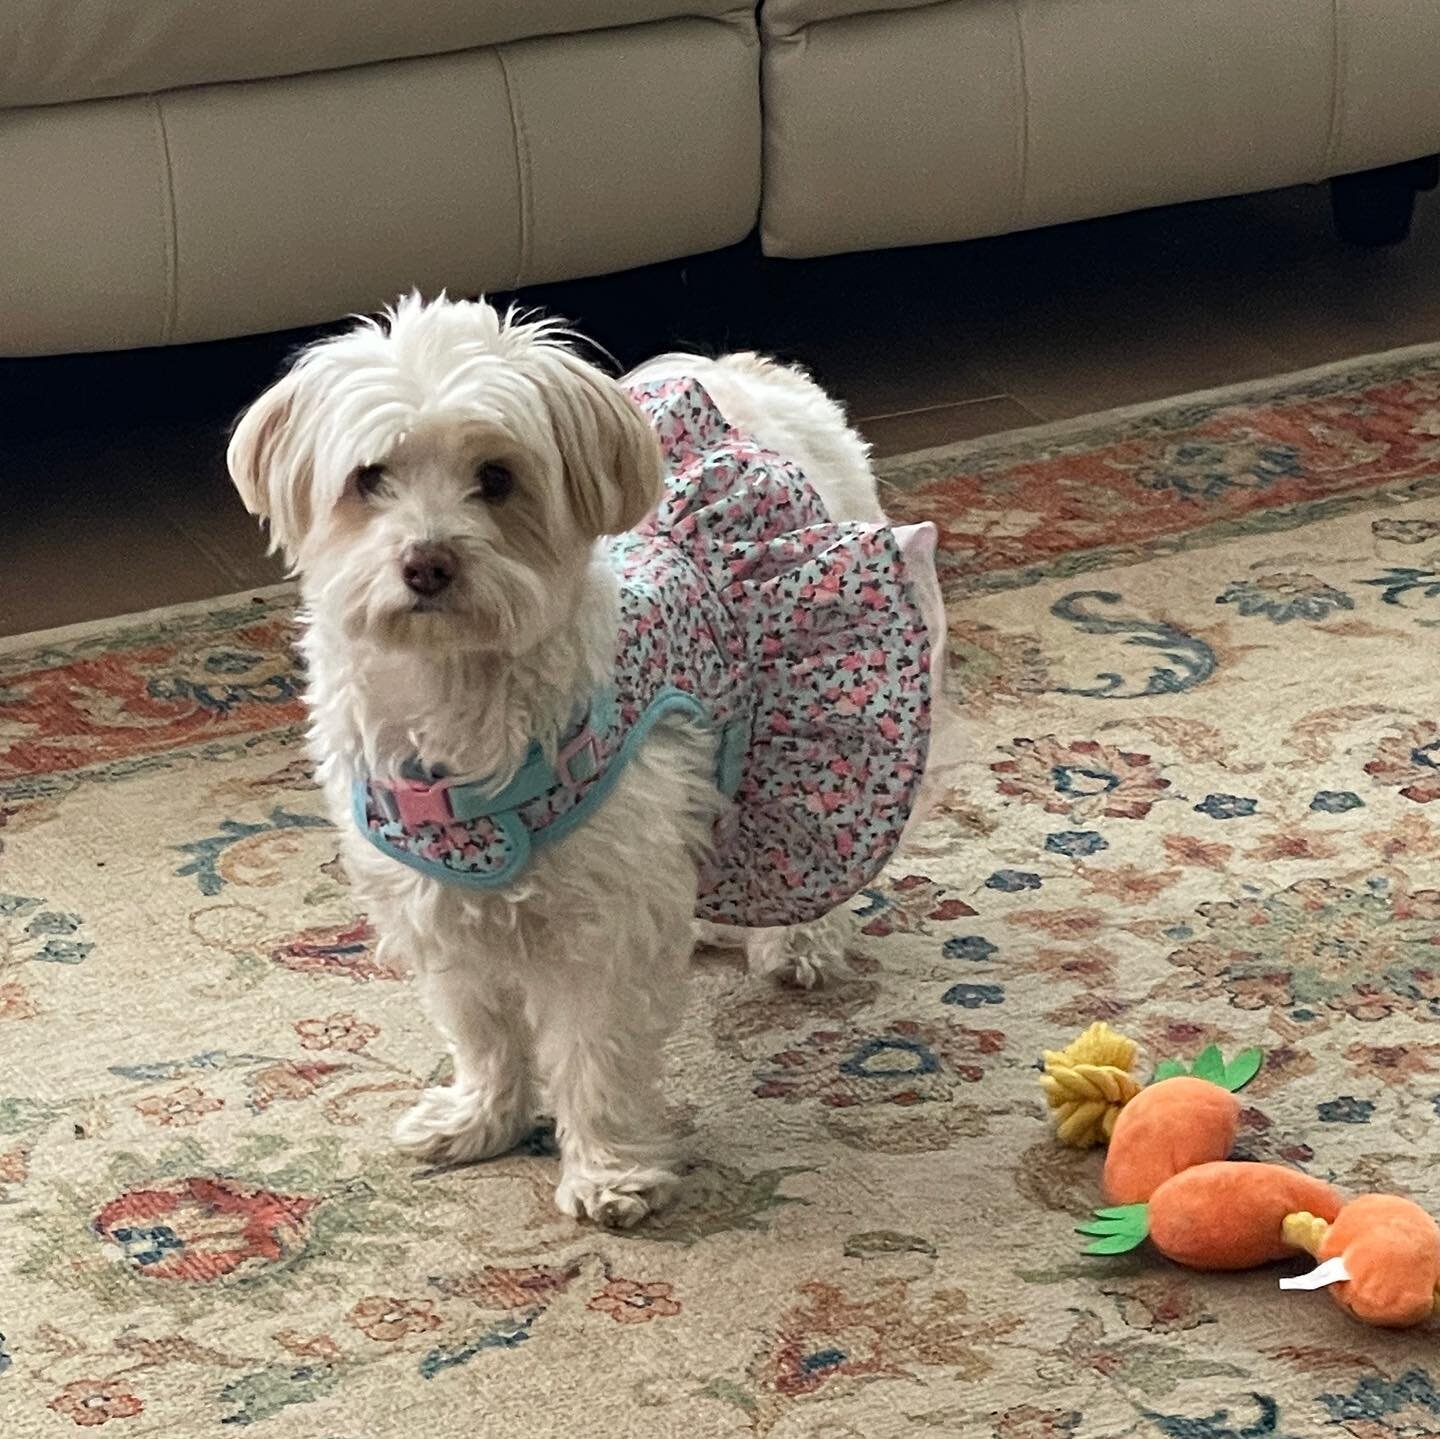 I&rsquo;m sure you&rsquo;re all wondering what I wore to the Met Gala. One word: tutu. 🩰 #mojotherescue

#metgala #metgalaoutfits #funnydogsofinstagram #funnydogs #dogsofinstagram #dogstagram #rescuedog #rescuedogsofinstagram #adoptdontshop #funnydo